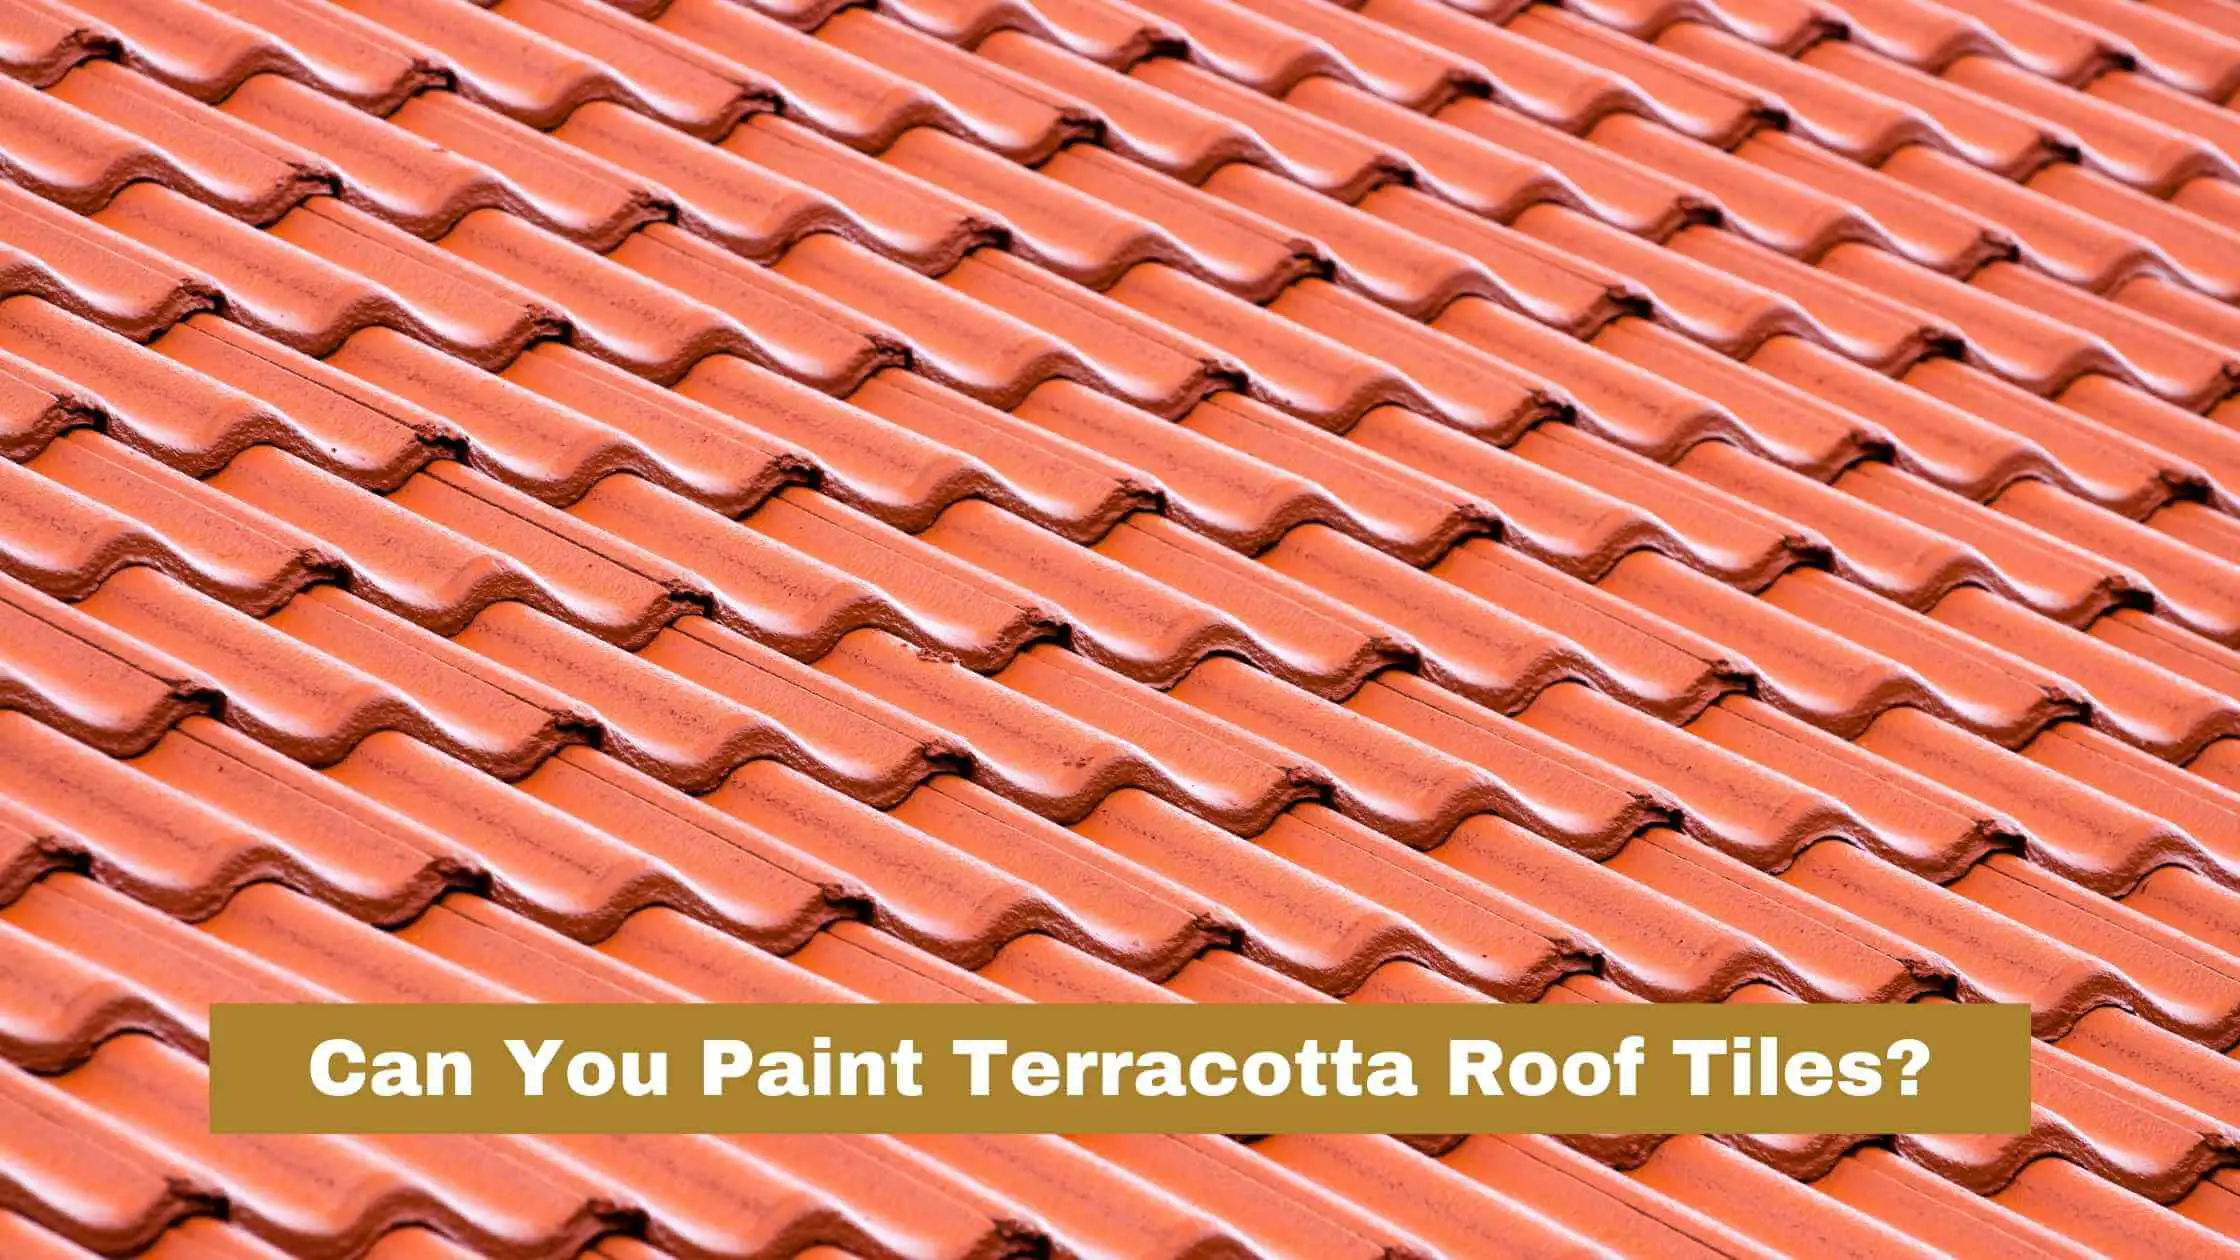 Can You Paint Terracotta Roof Tiles